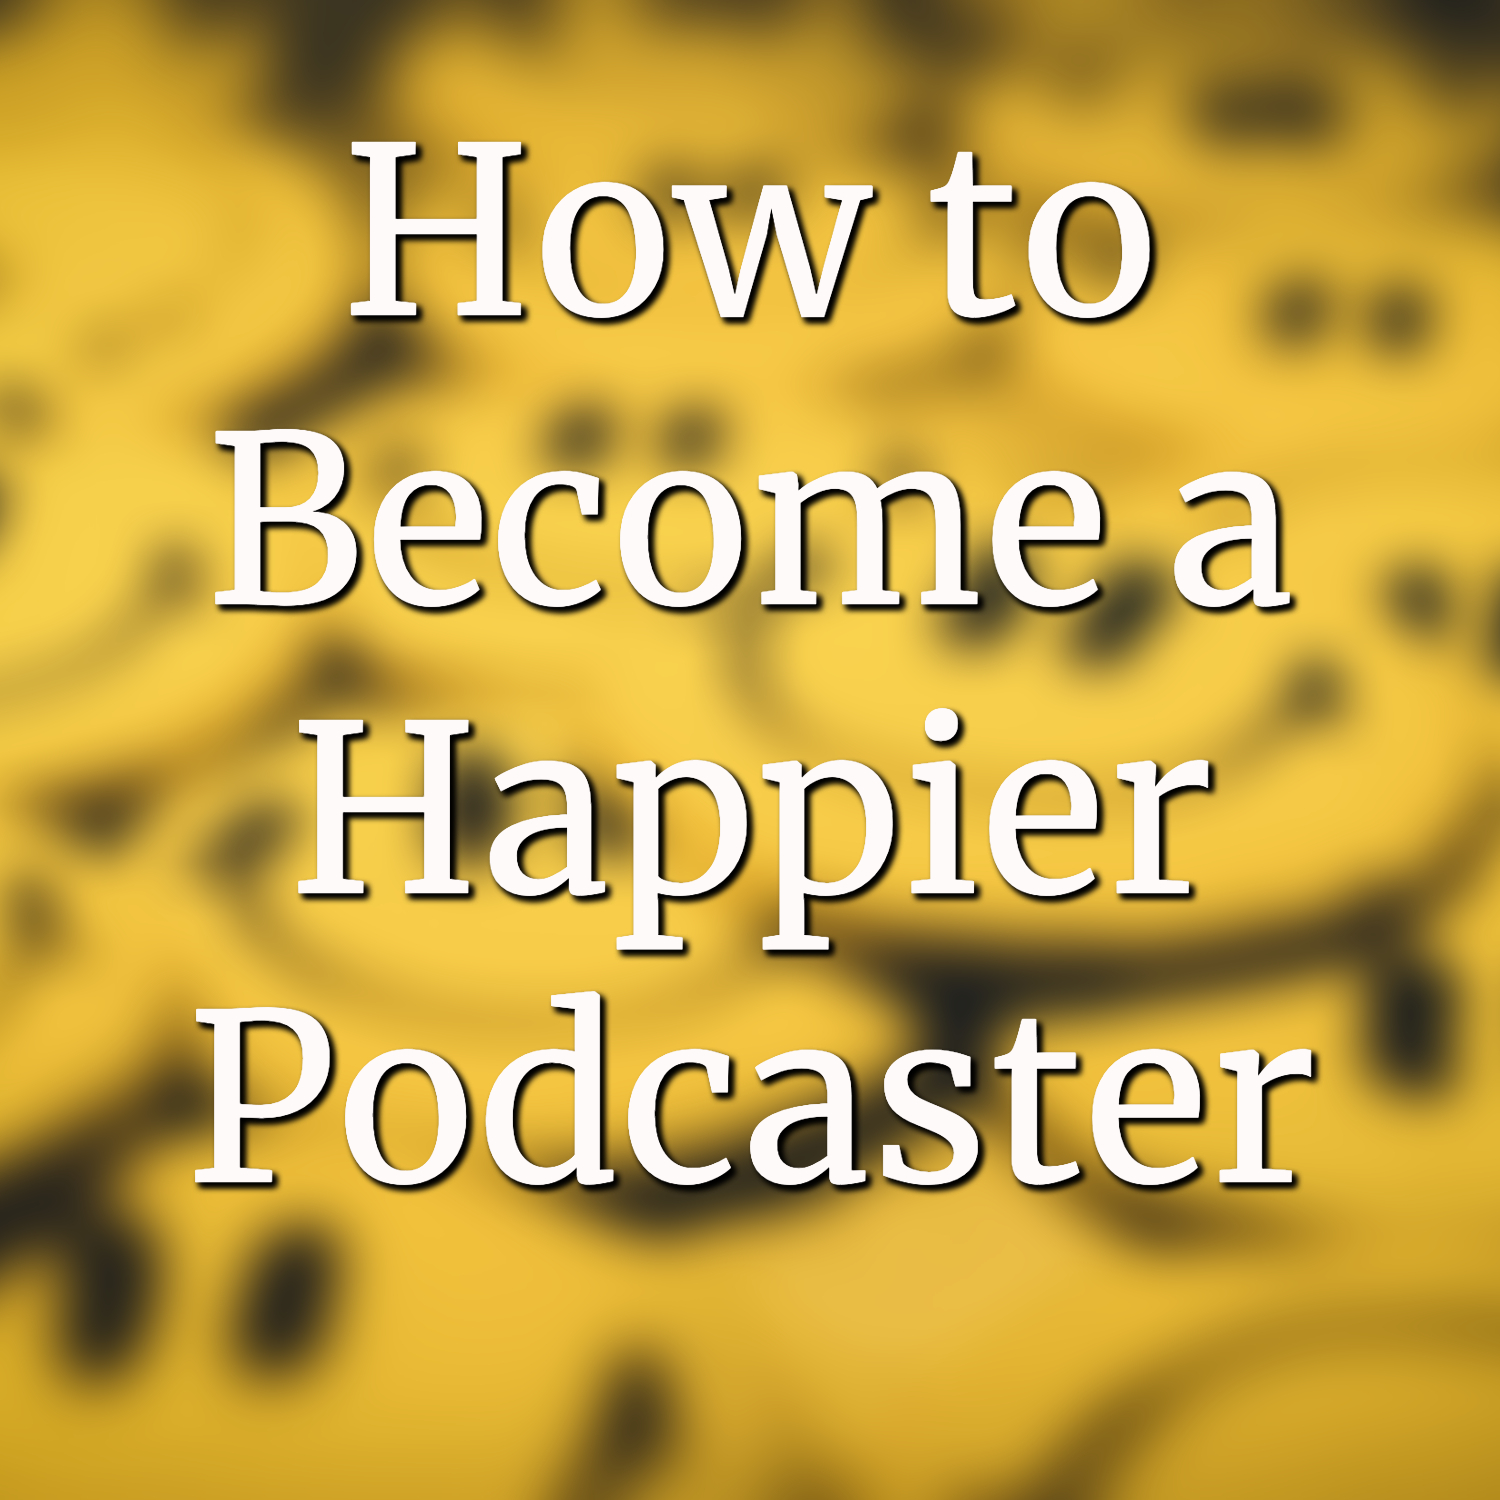 How To Become A Happier Podcaster